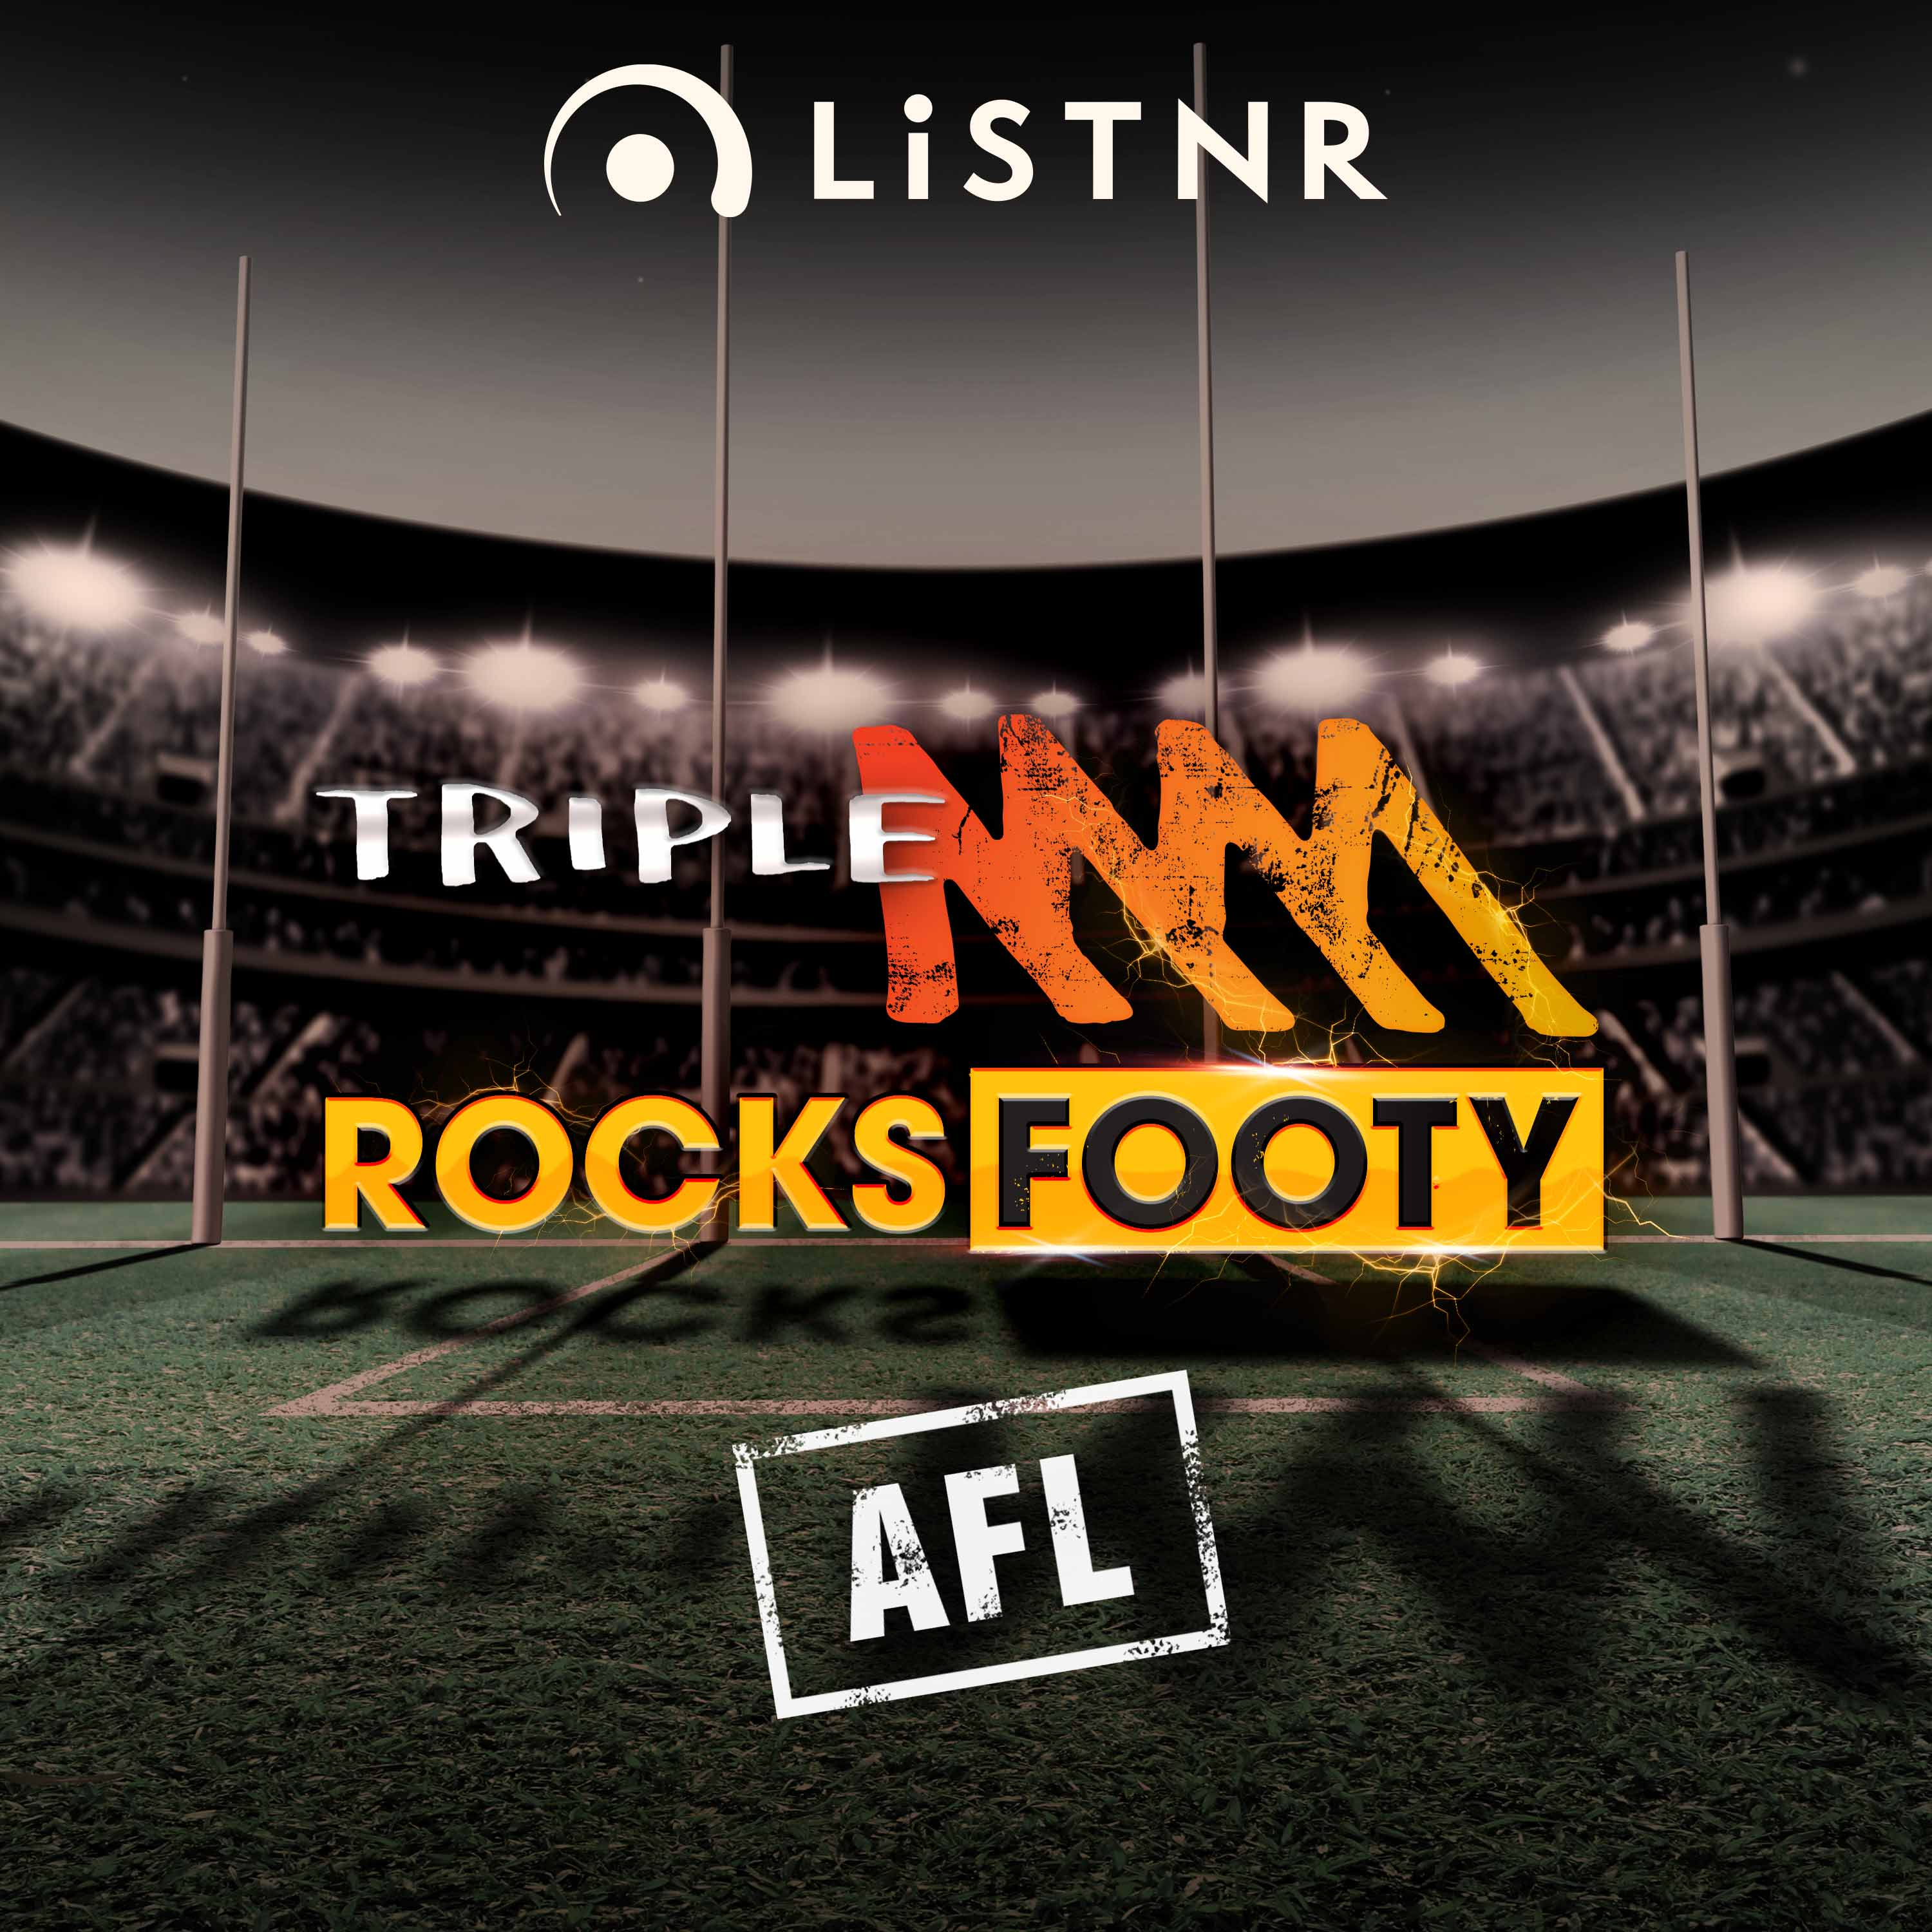 Bailey Banfield joins Triple M after Freo-Pies